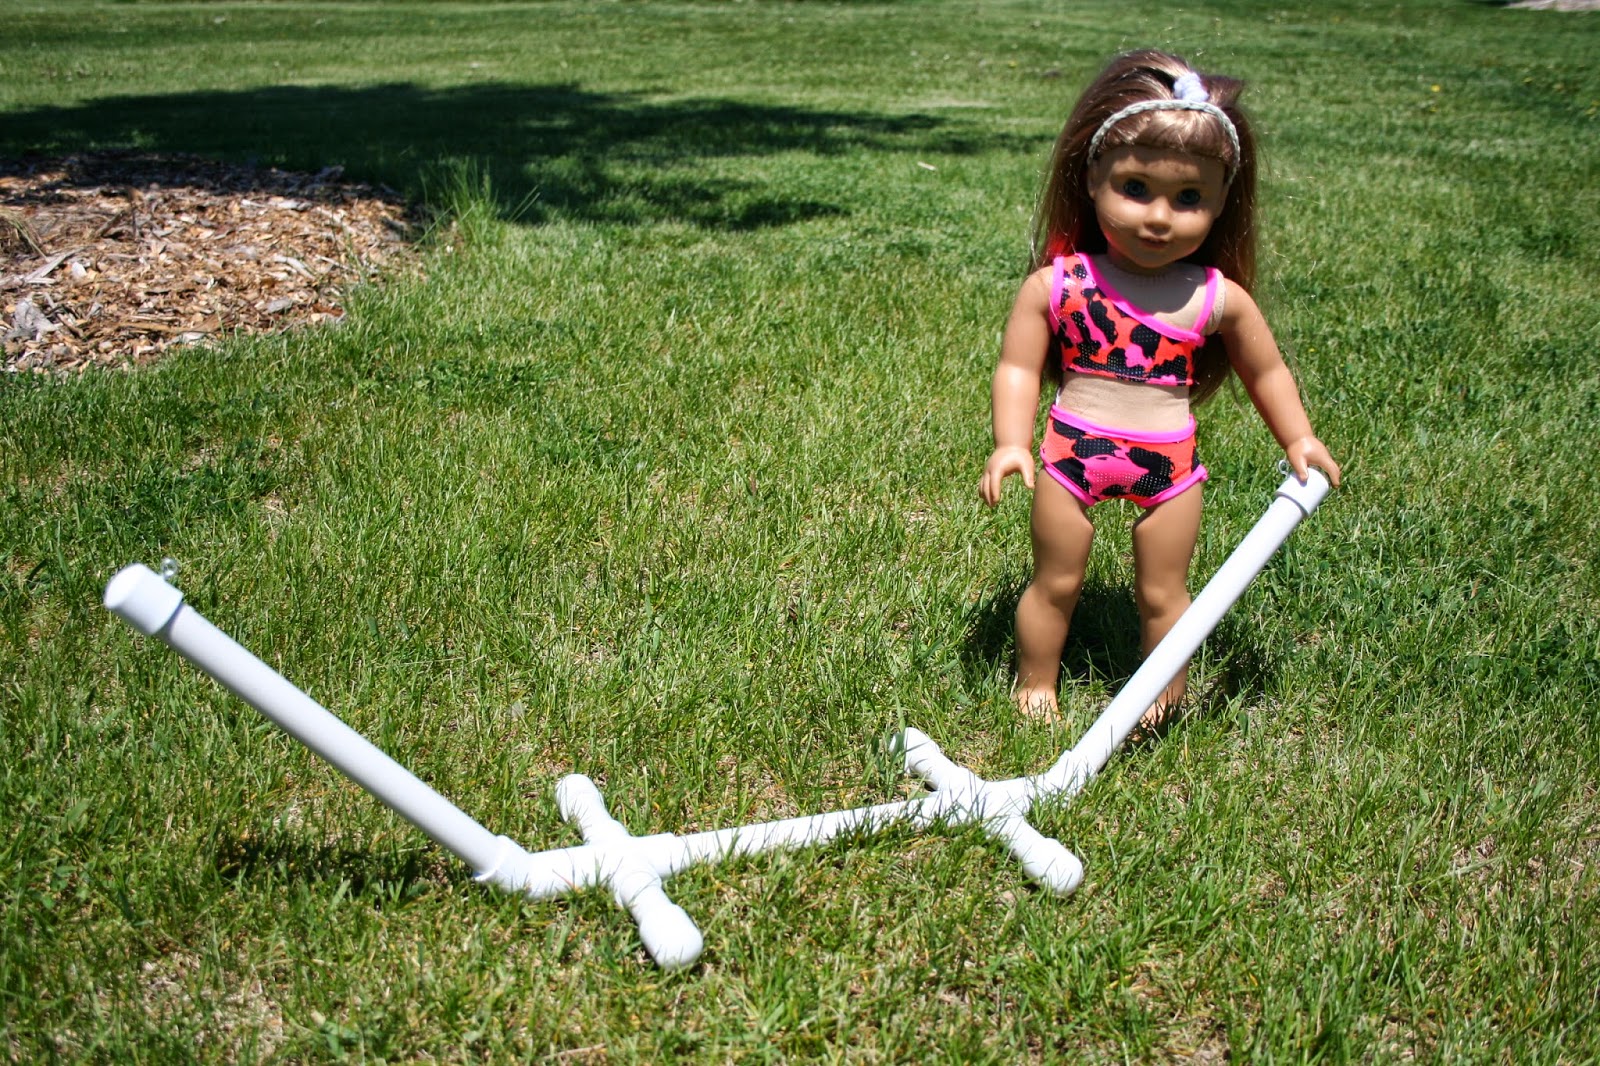 Hammock stand tutorial for American Girl Doll